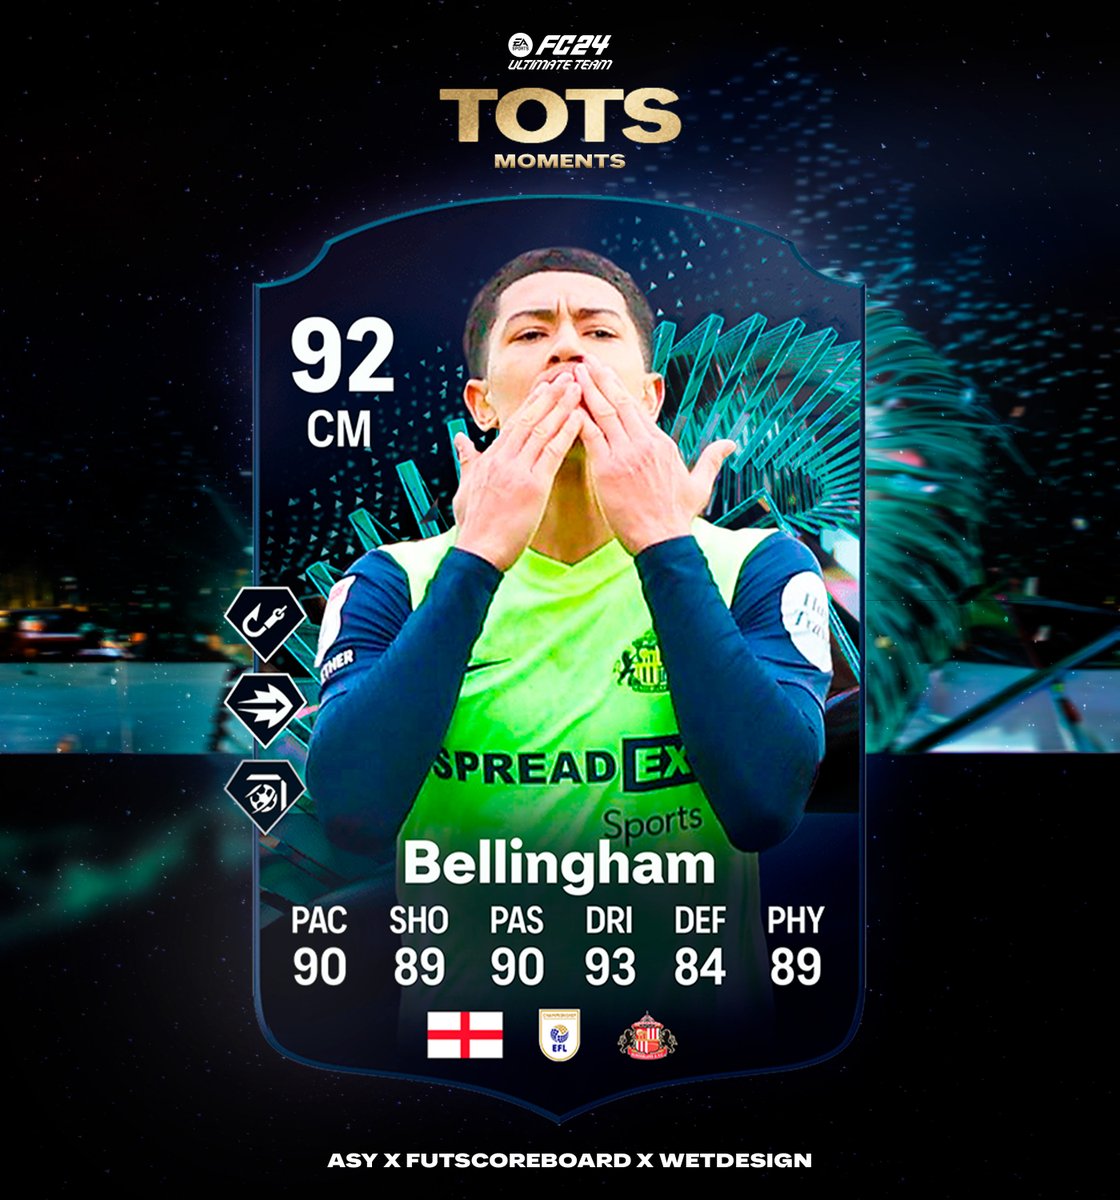 🚨JOBE BELLINGHAM🏴󠁧󠁢󠁥󠁮󠁧󠁿 is added to come in TOTS Mixed 4 Team! Official PlayStyle's & Stats✅ Following in your brother's footsteps, good luck Jobe! Make sure to follow @AsyFutTrader , @Fut_scoreboard and me for more!😍